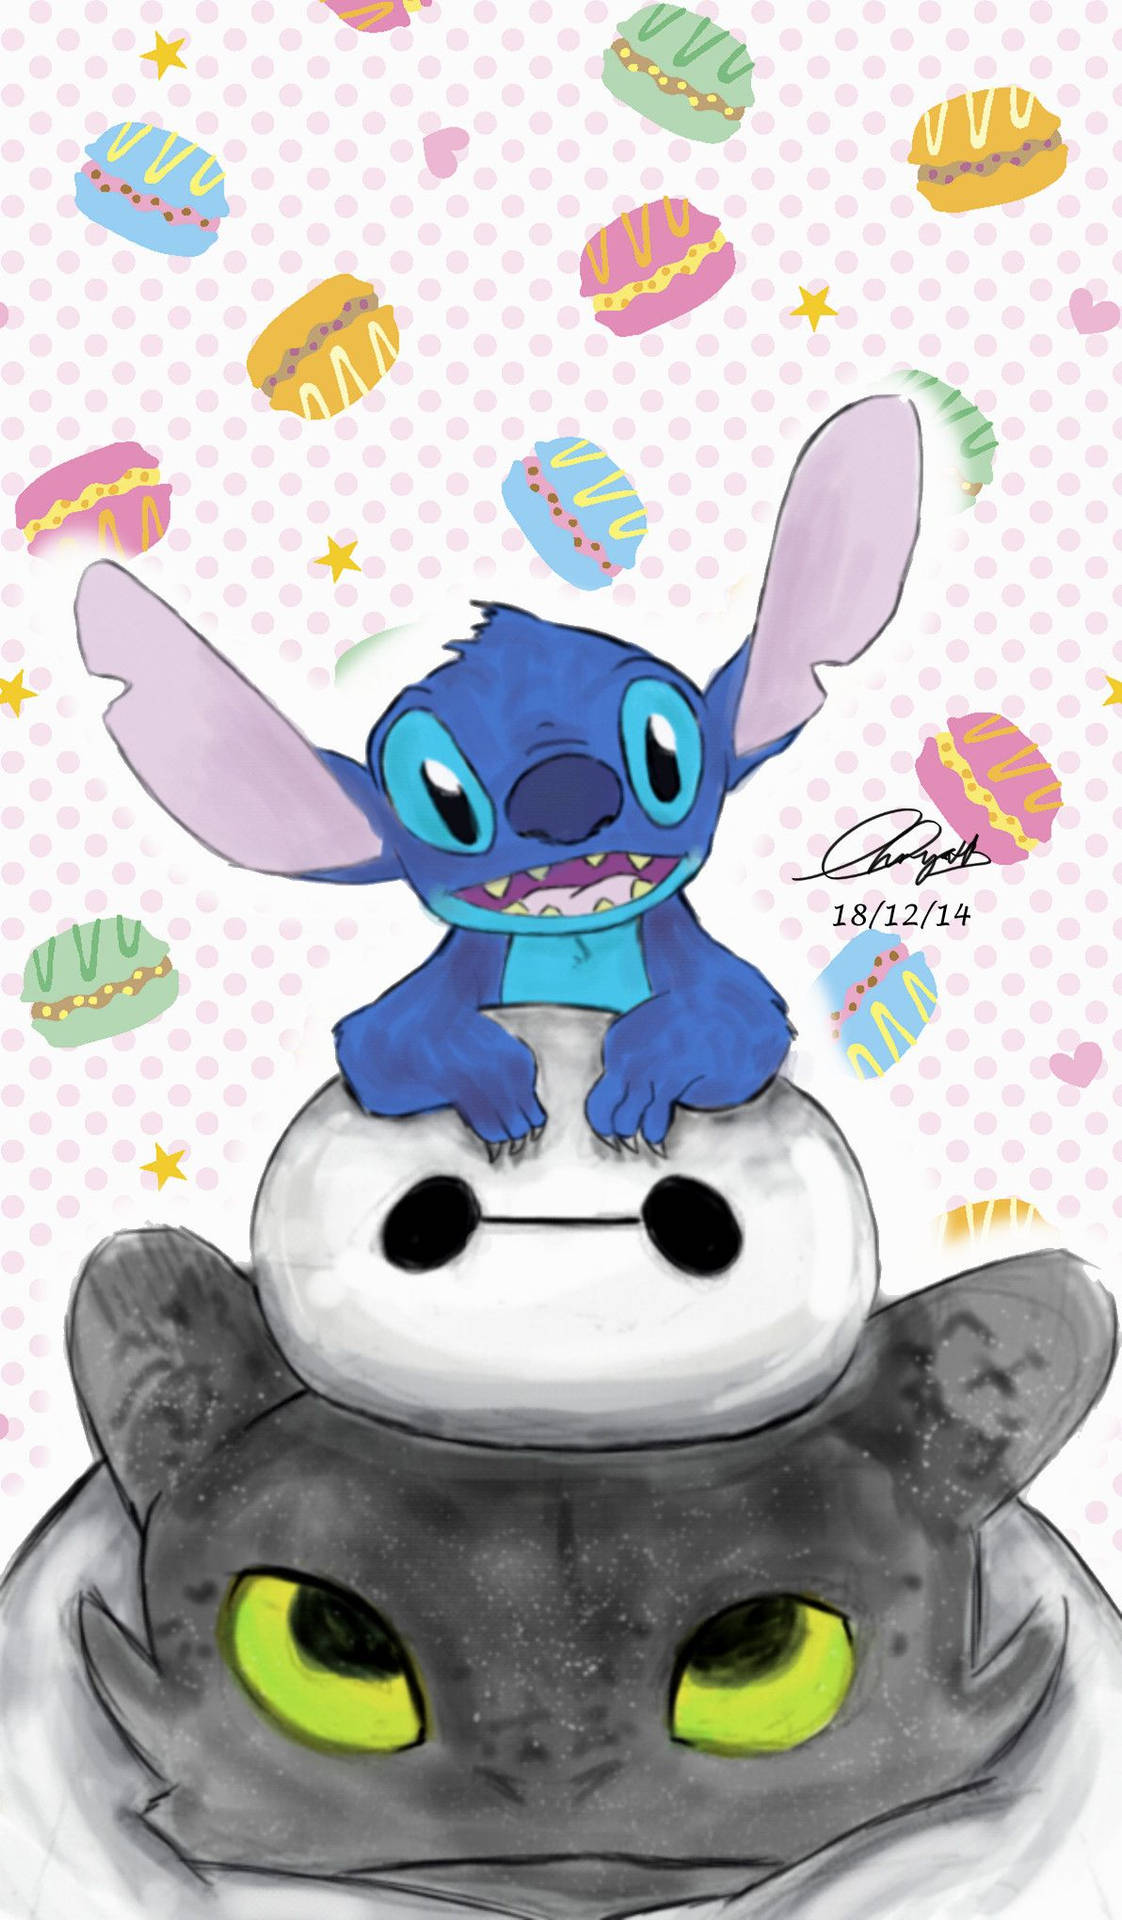 Stitch, Baymax And Toothless Art wallpaper. 